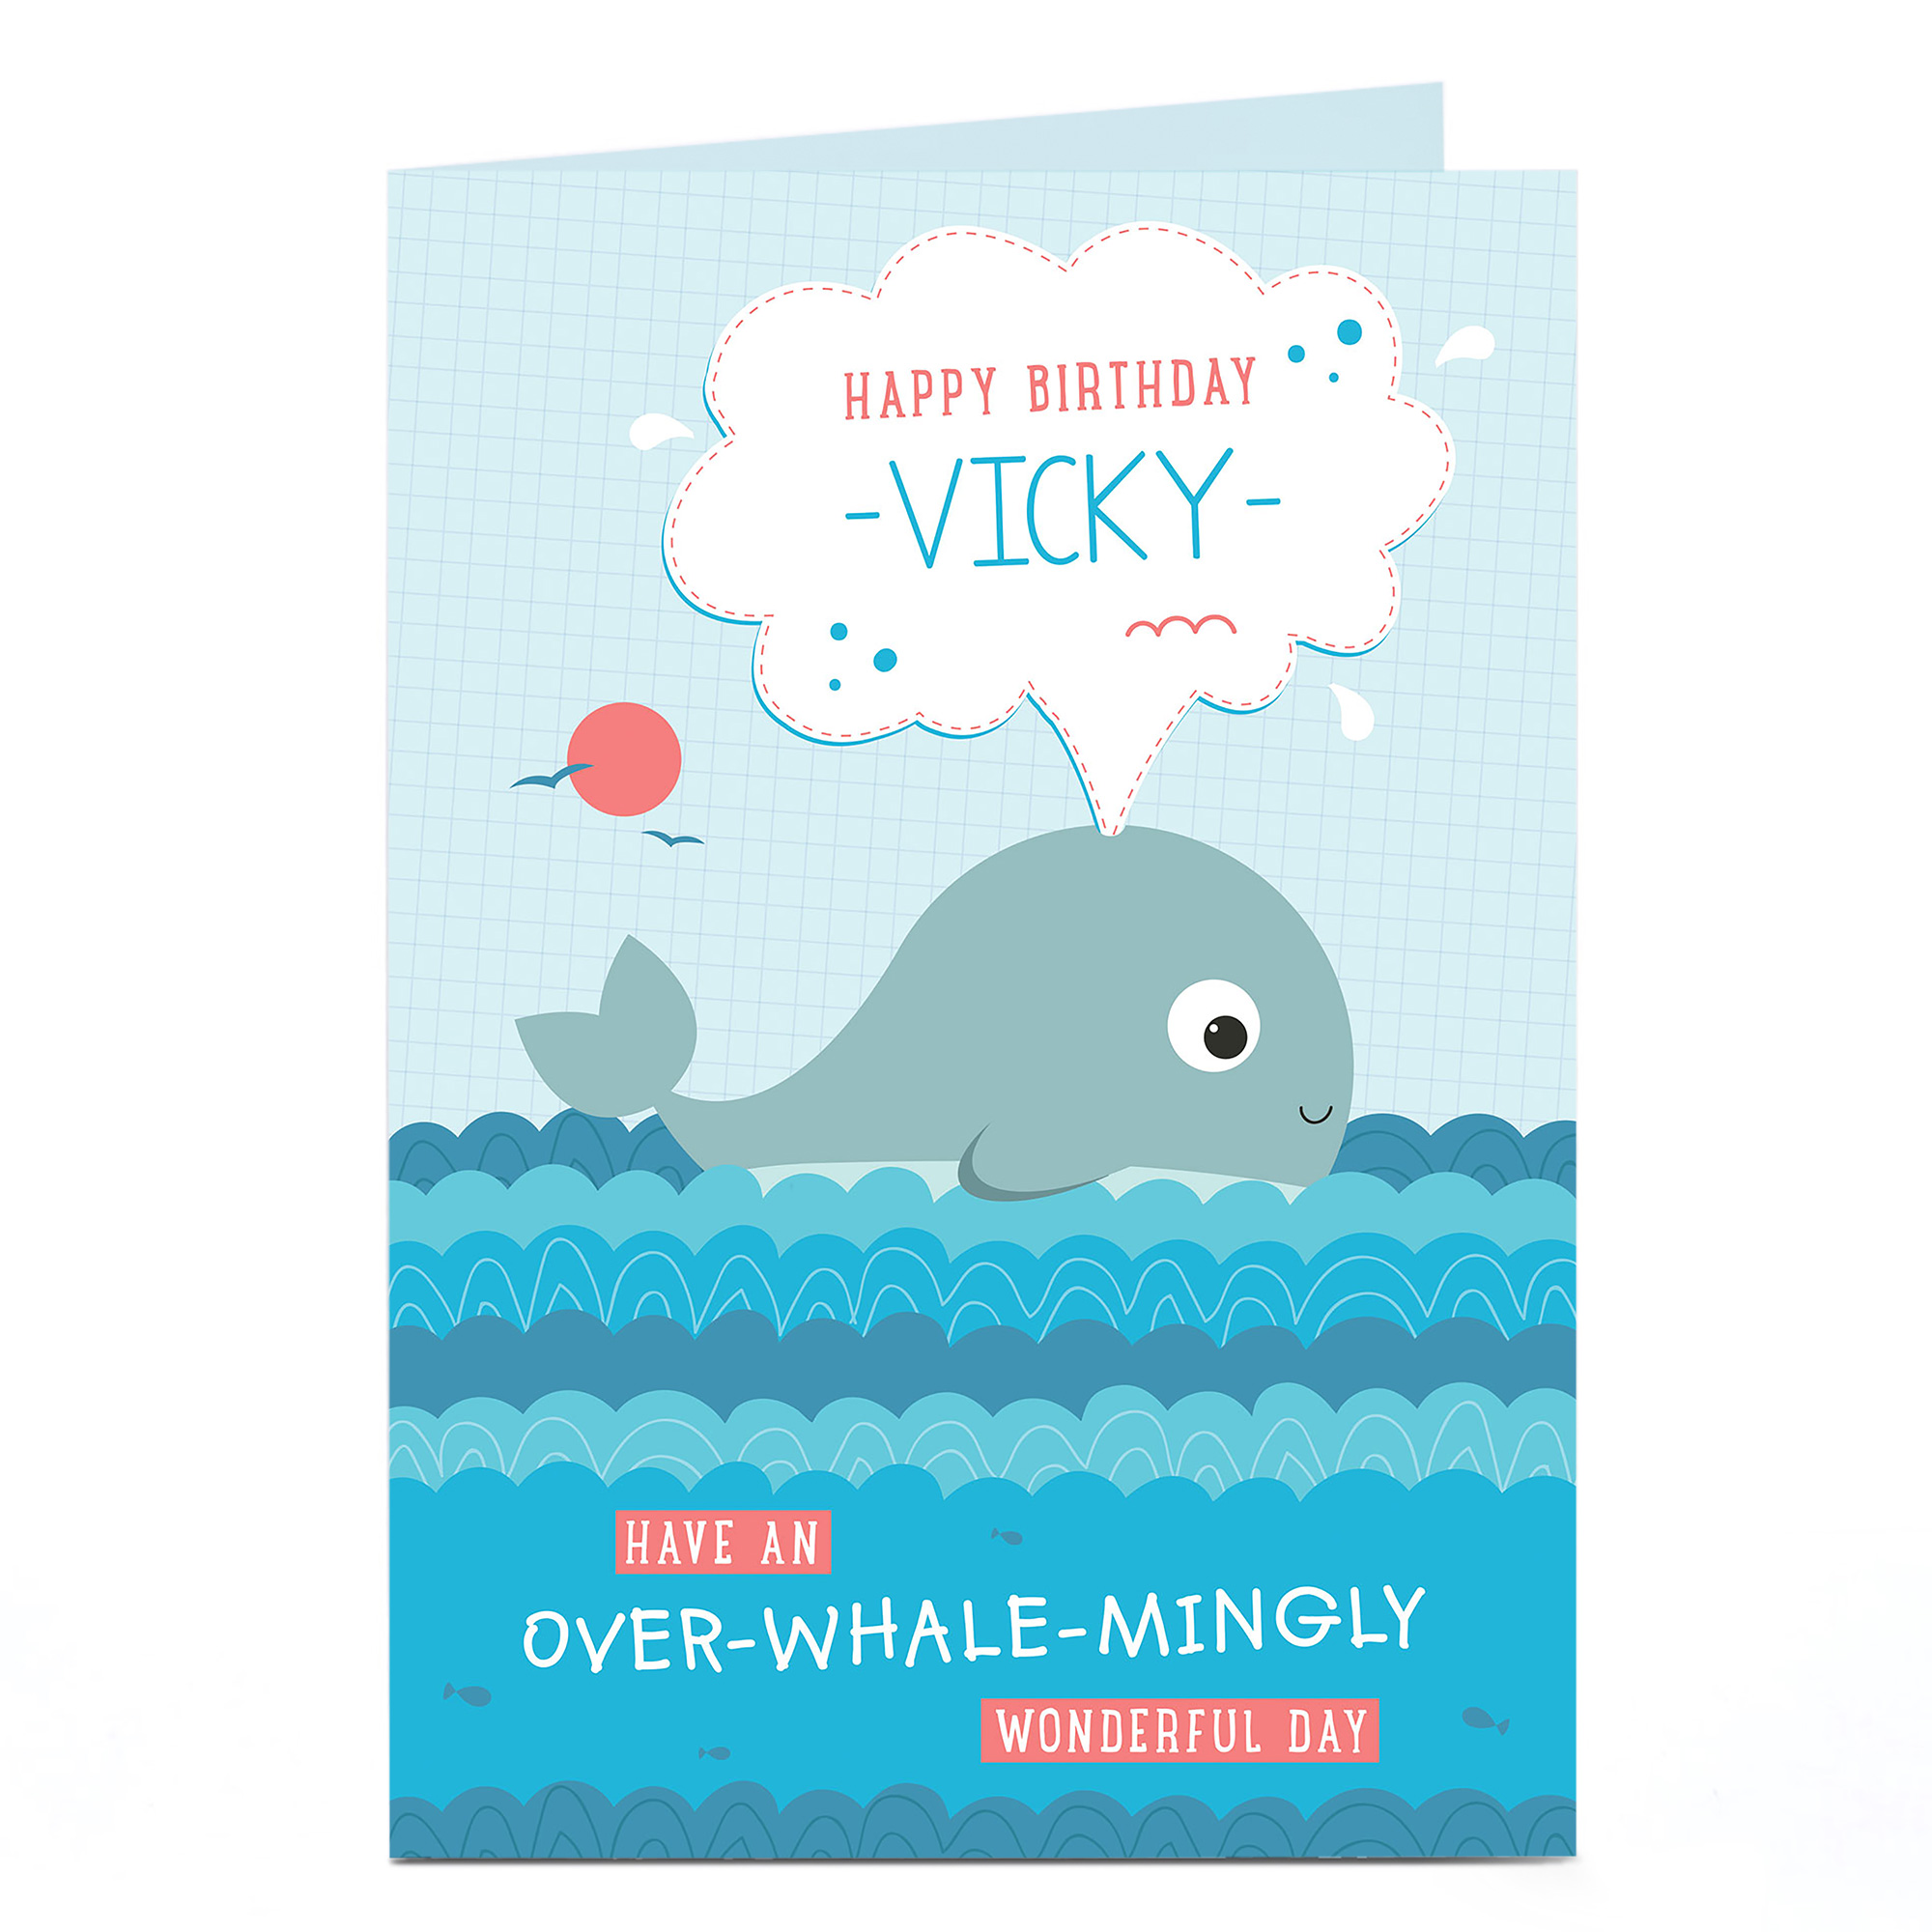 Personalised Birthday Card - Over-Whale-Mingly Wonderful